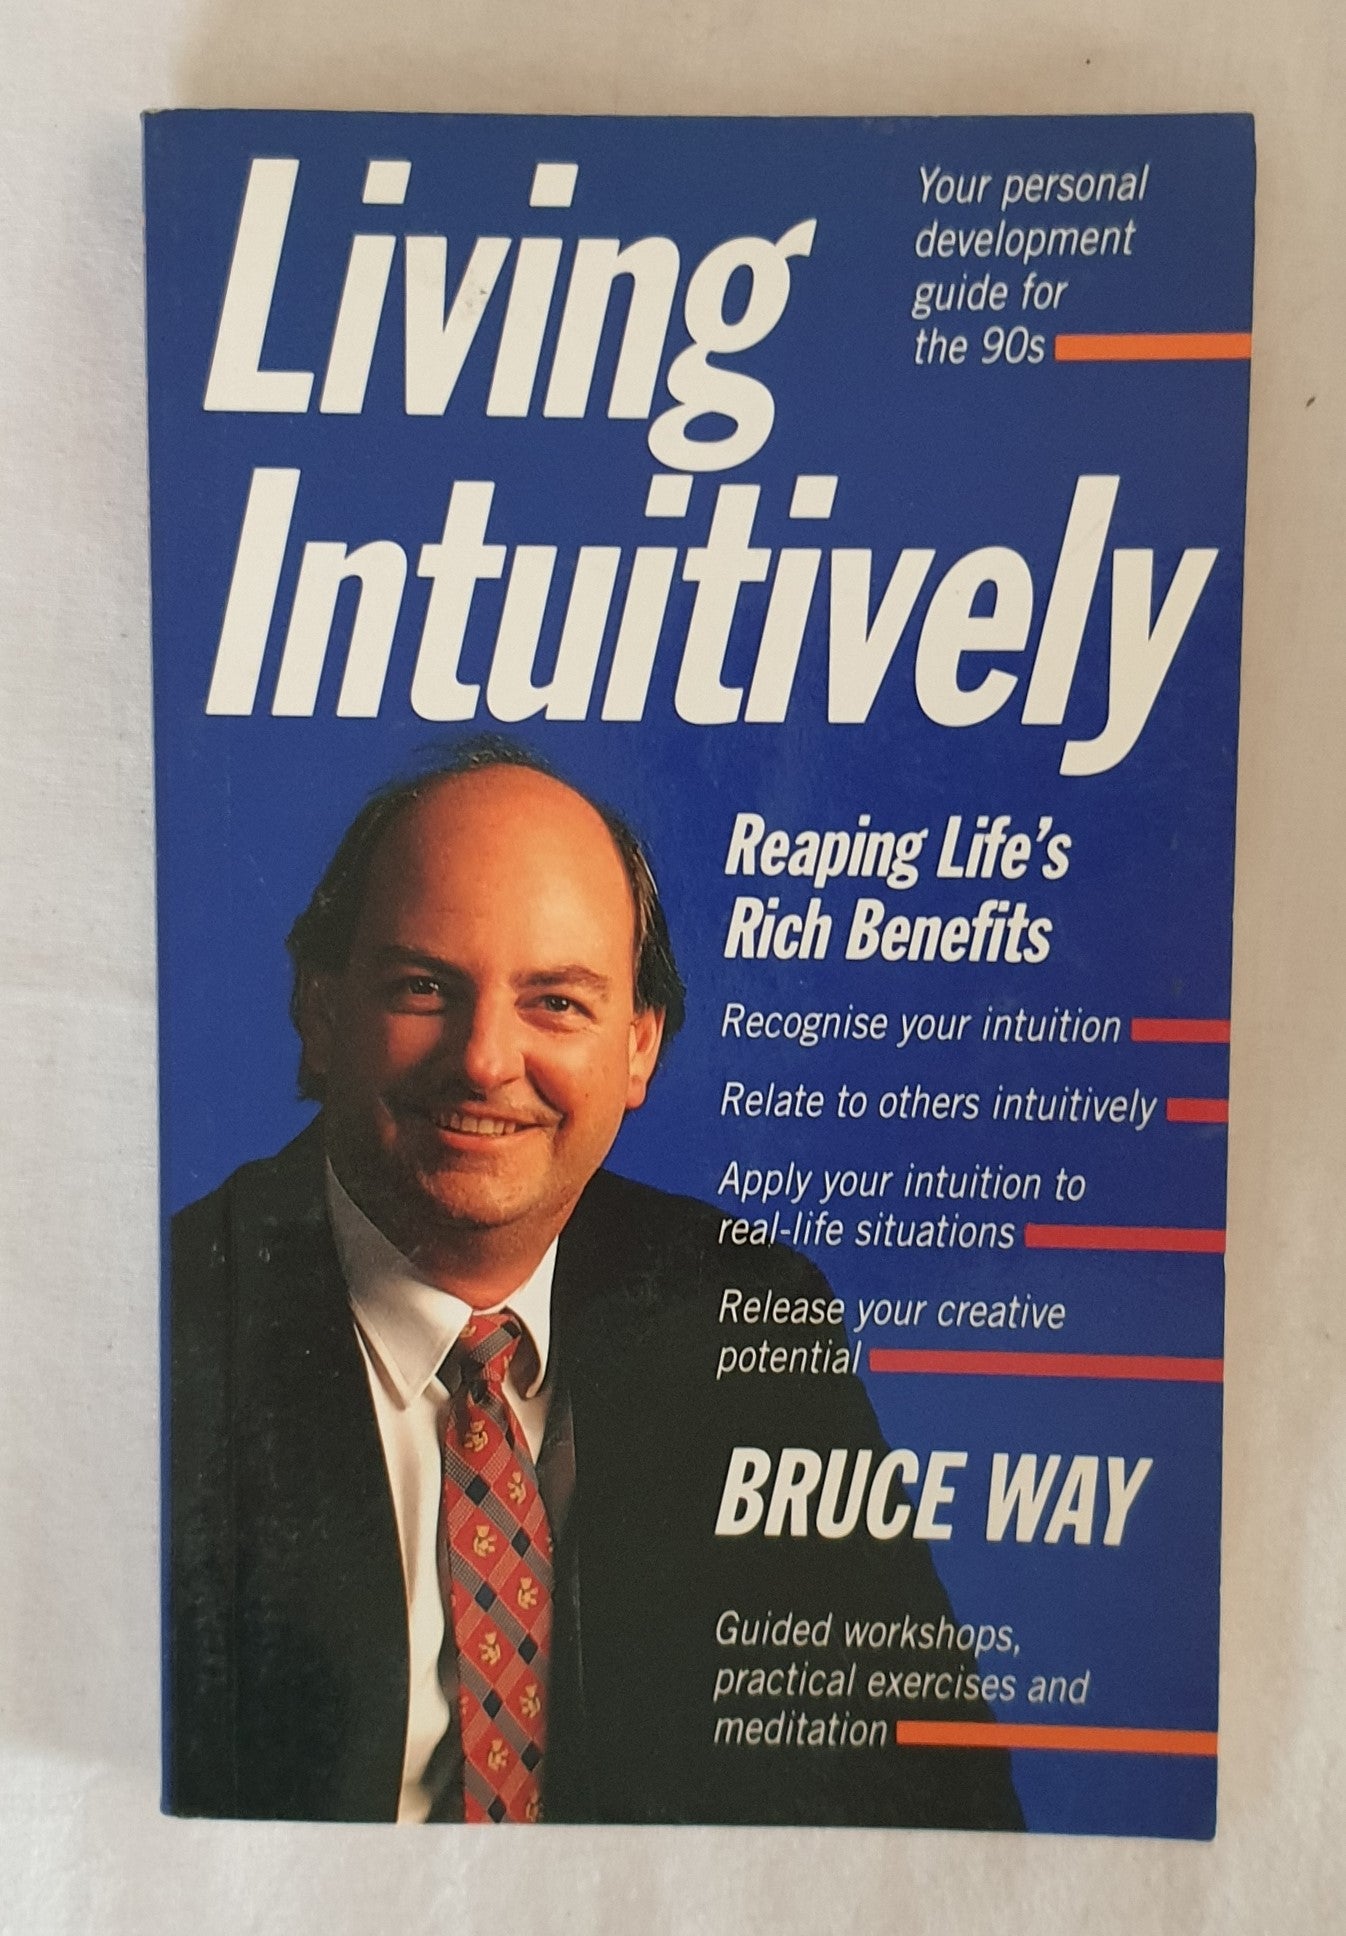 Living Intuitively by Bruce Way